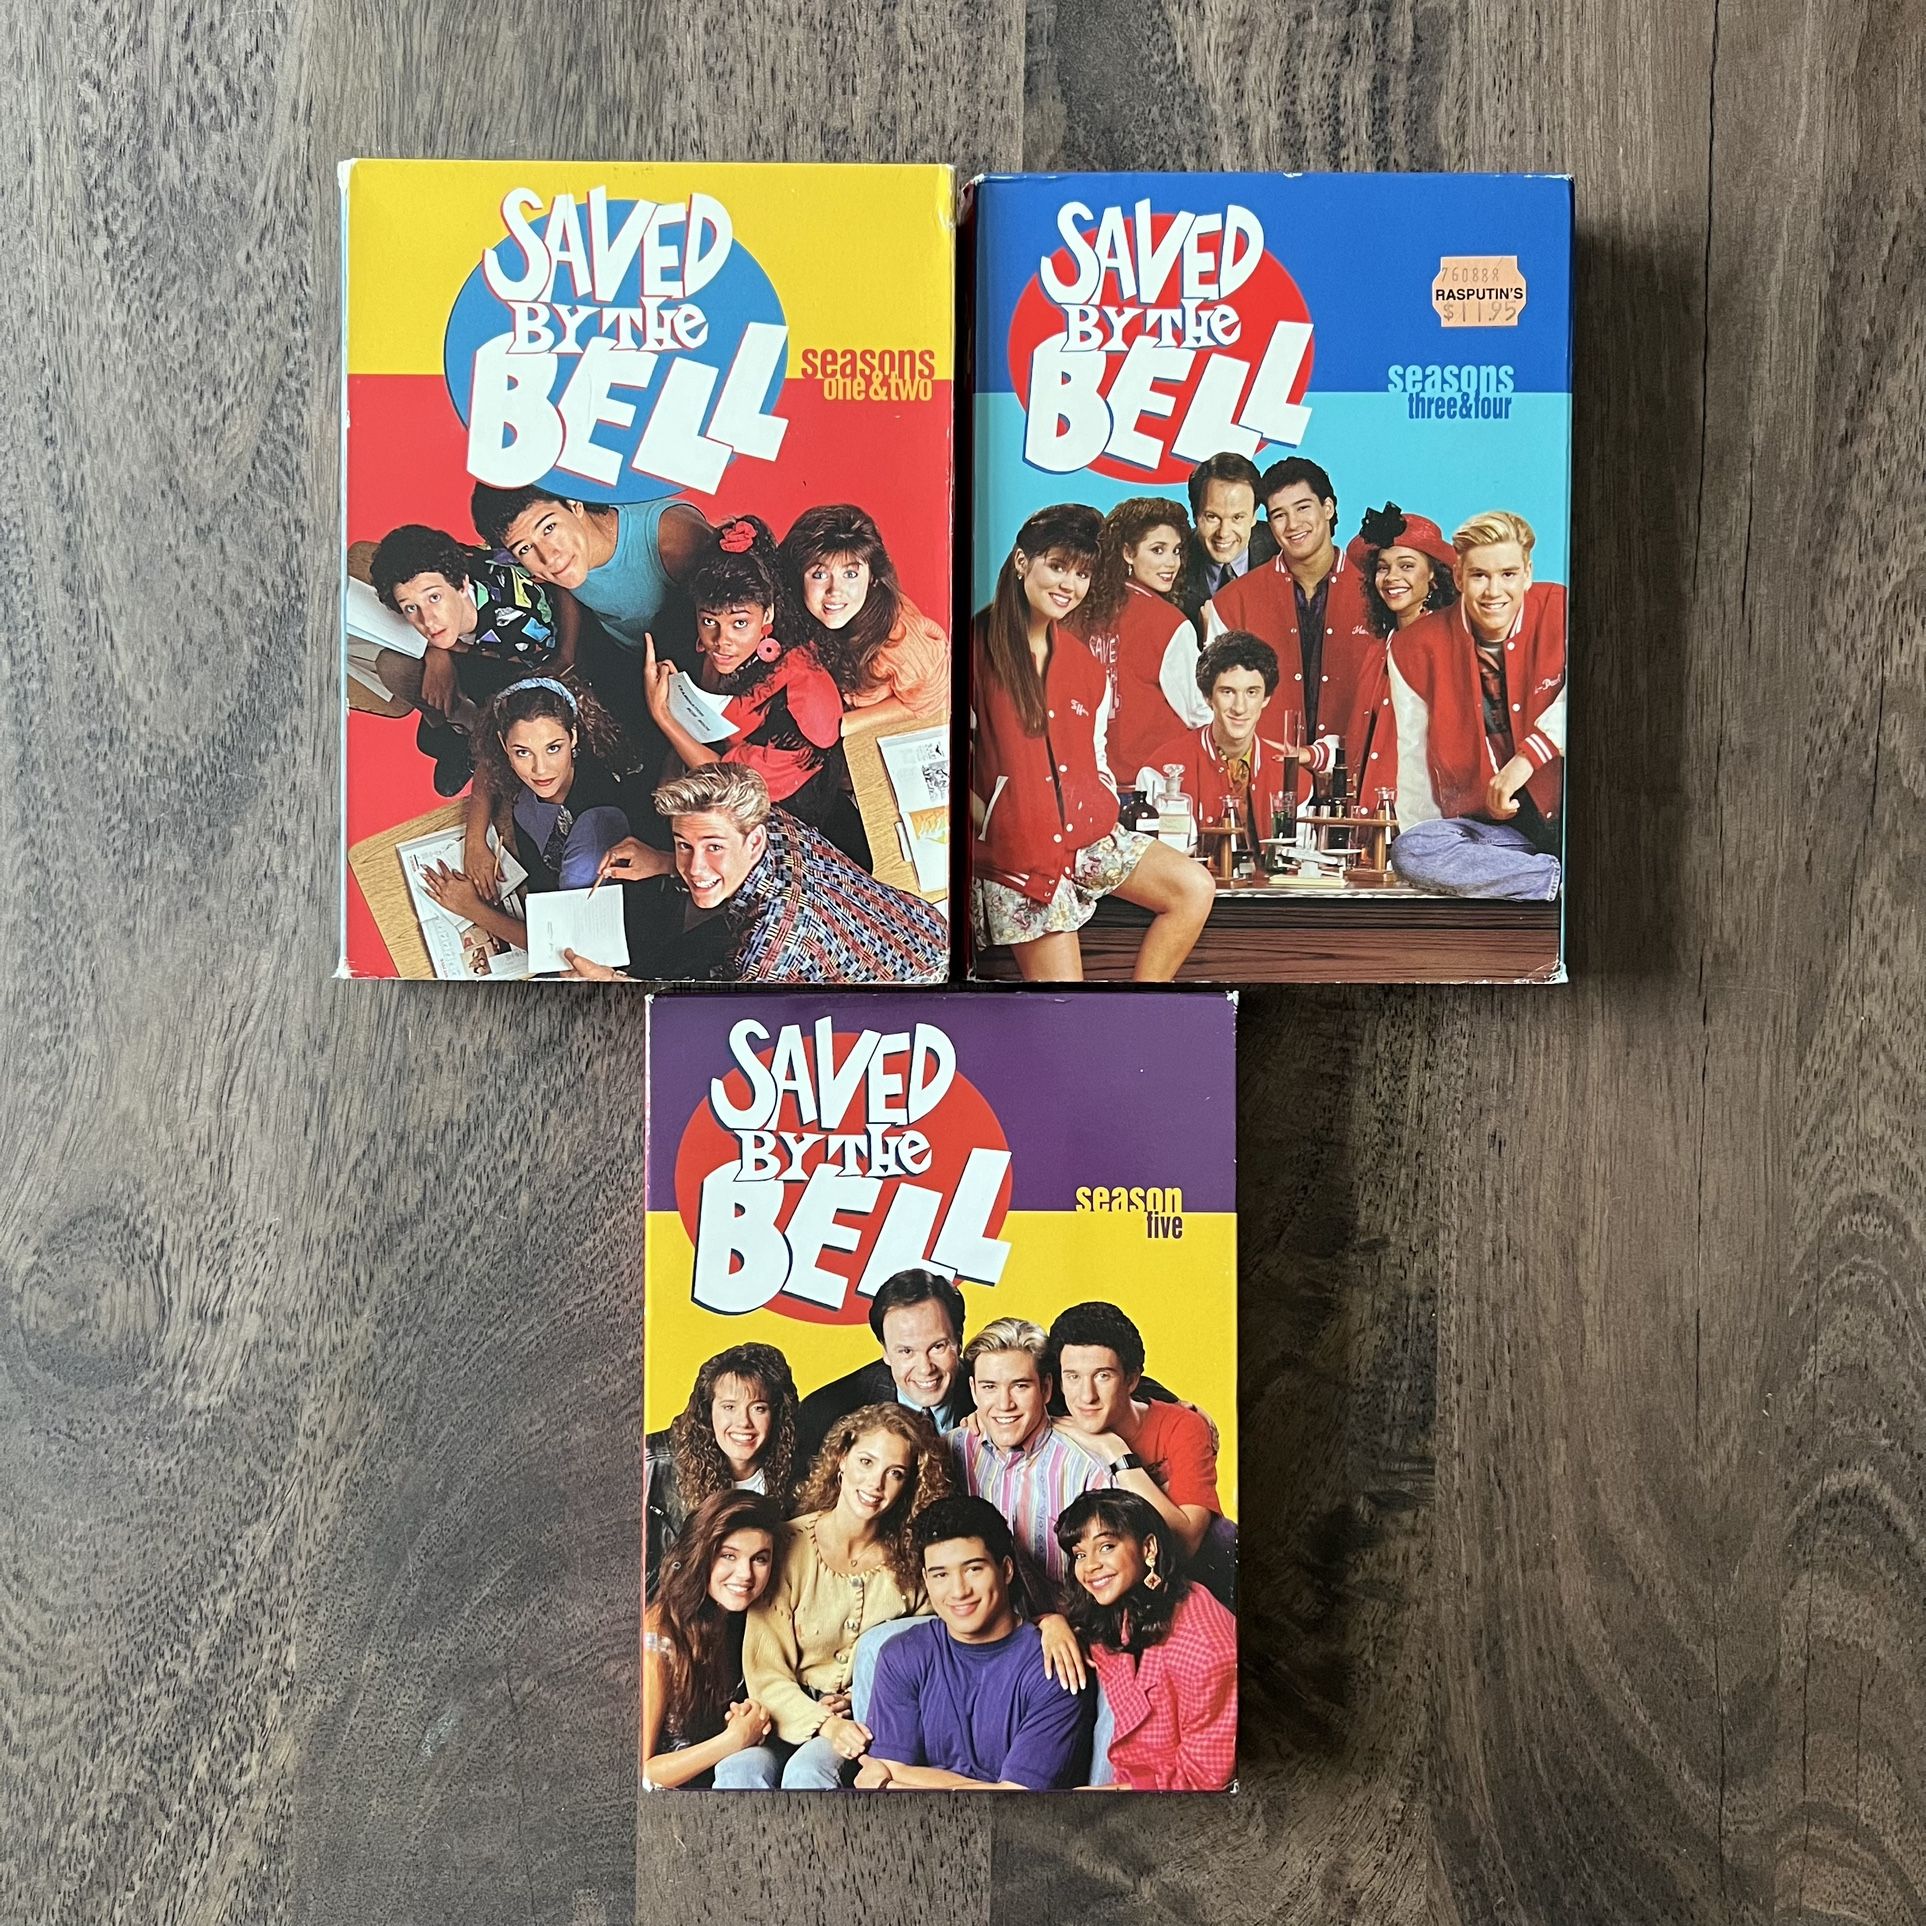 Saved by the Bell Vintage 1990s Comedy TV Show Complete Series: Seasons 1 - 5